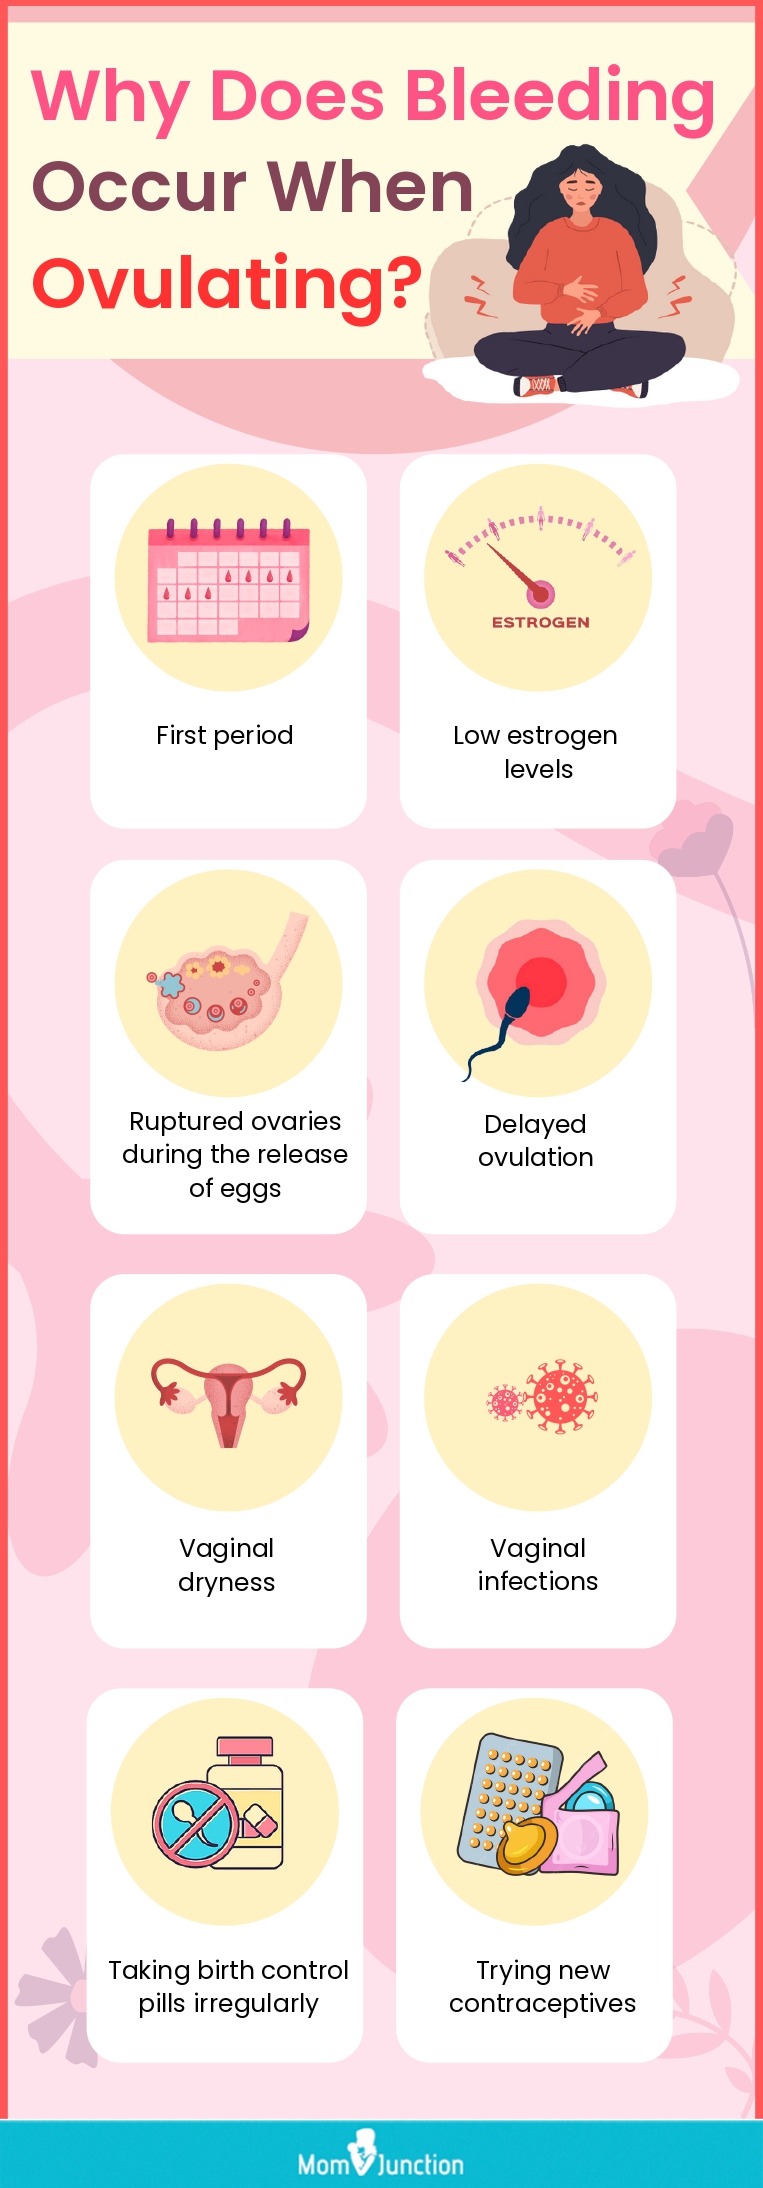 Bleeding & Spotting During Ovulation: When to be Concerned